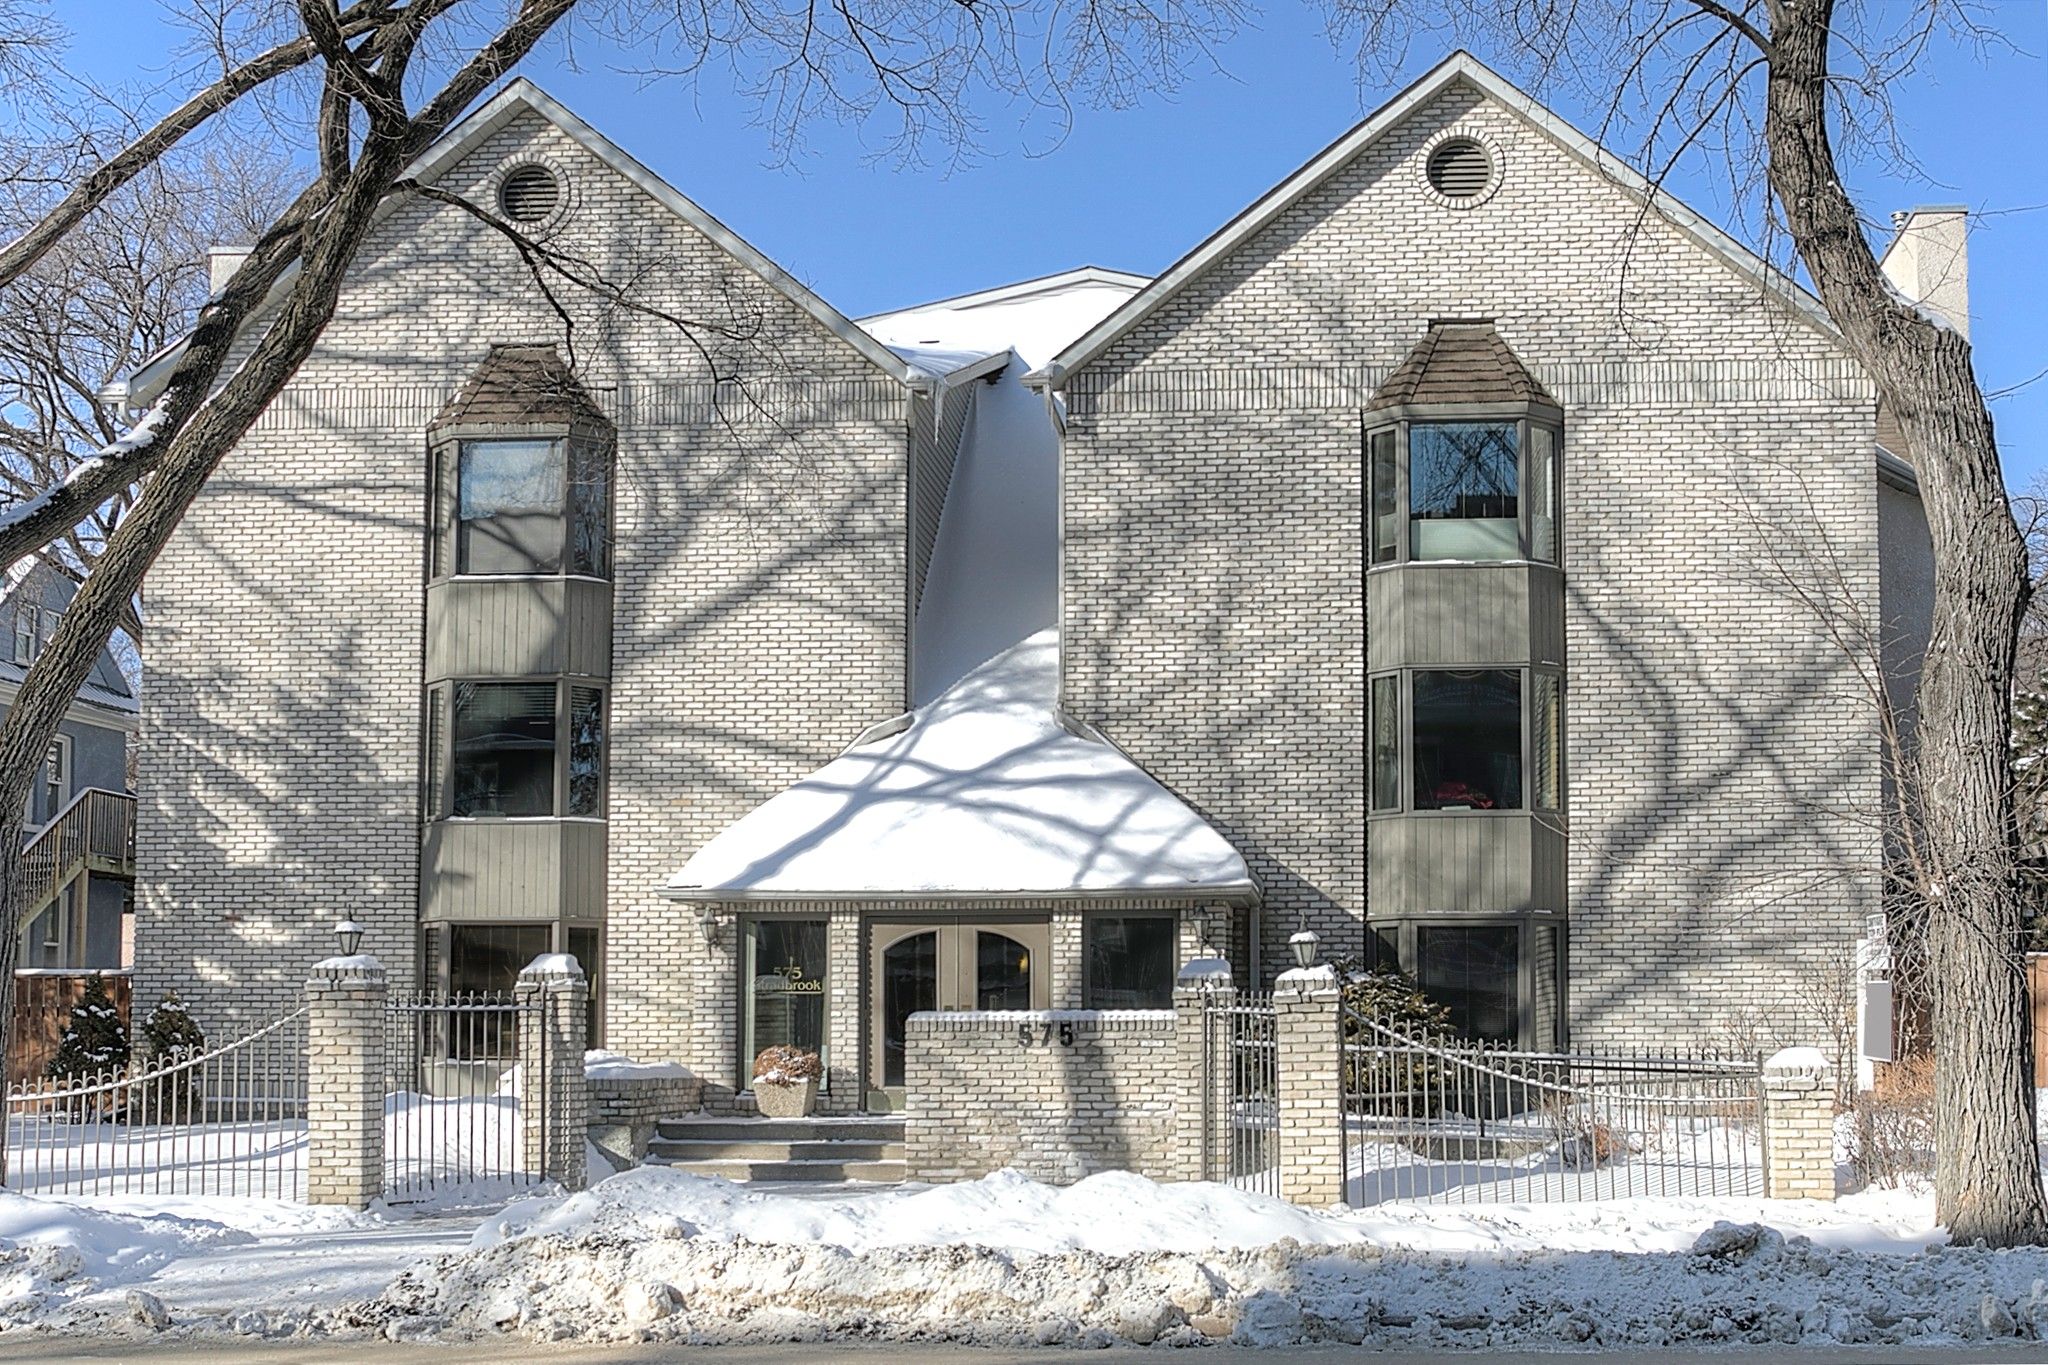 I have sold a property at 302 575 Stradbrook AVE in Winnipeg
